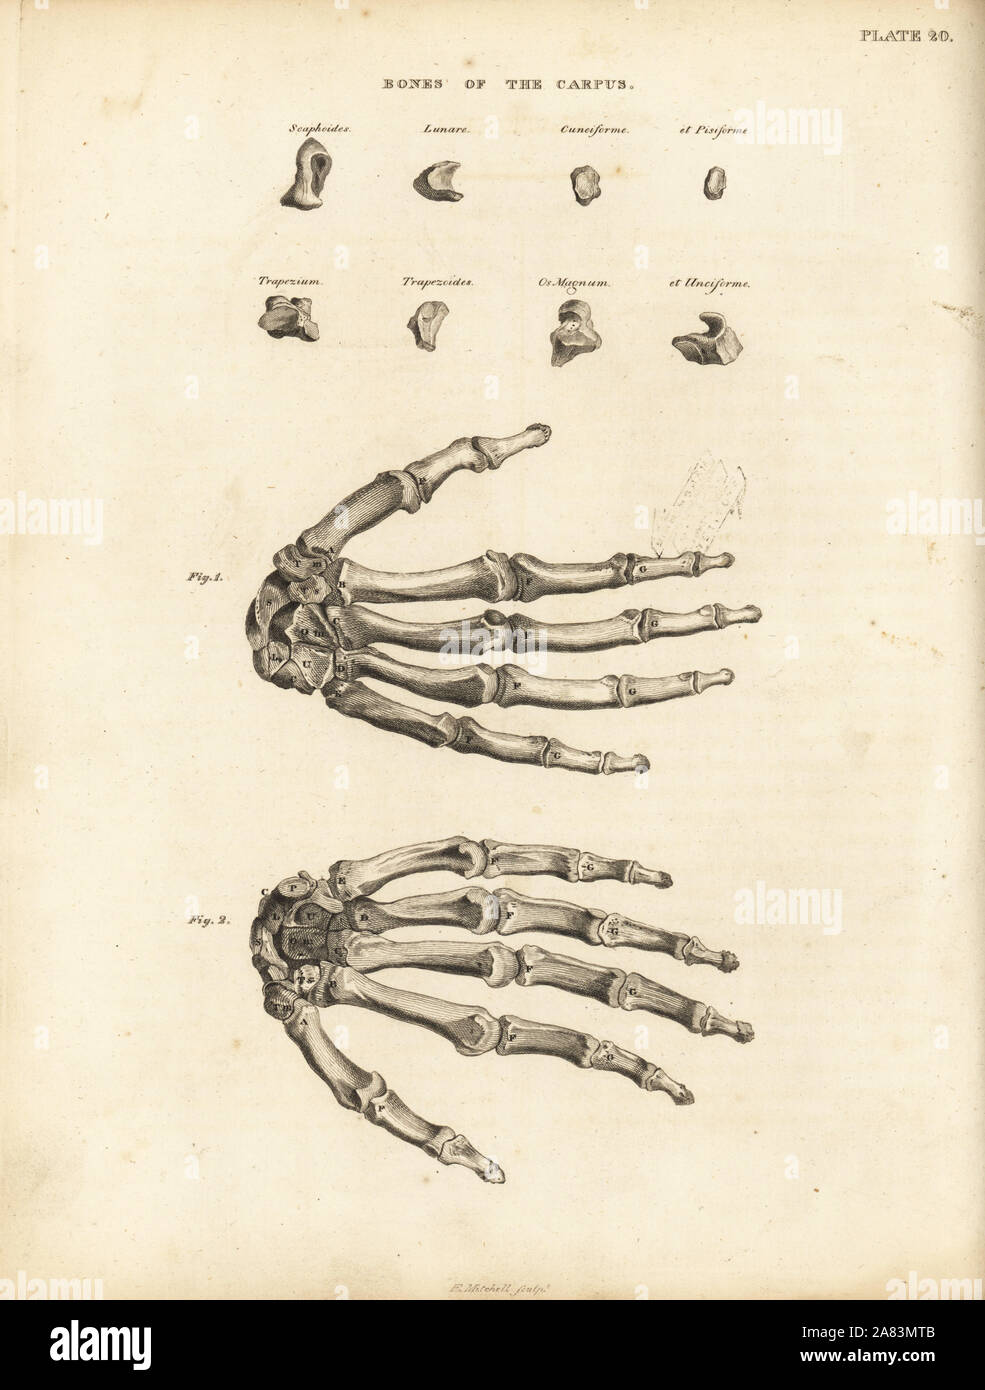 Bones of the carpus, metacarpus and fingers in the human hand. Copperplate engraving by Edward Mitchell after an anatomical illustration from John Barclay's A Series of Engravings of the Human Skeleton, MacLachlan and Stewart, Edinburgh, 1824. Stock Photo